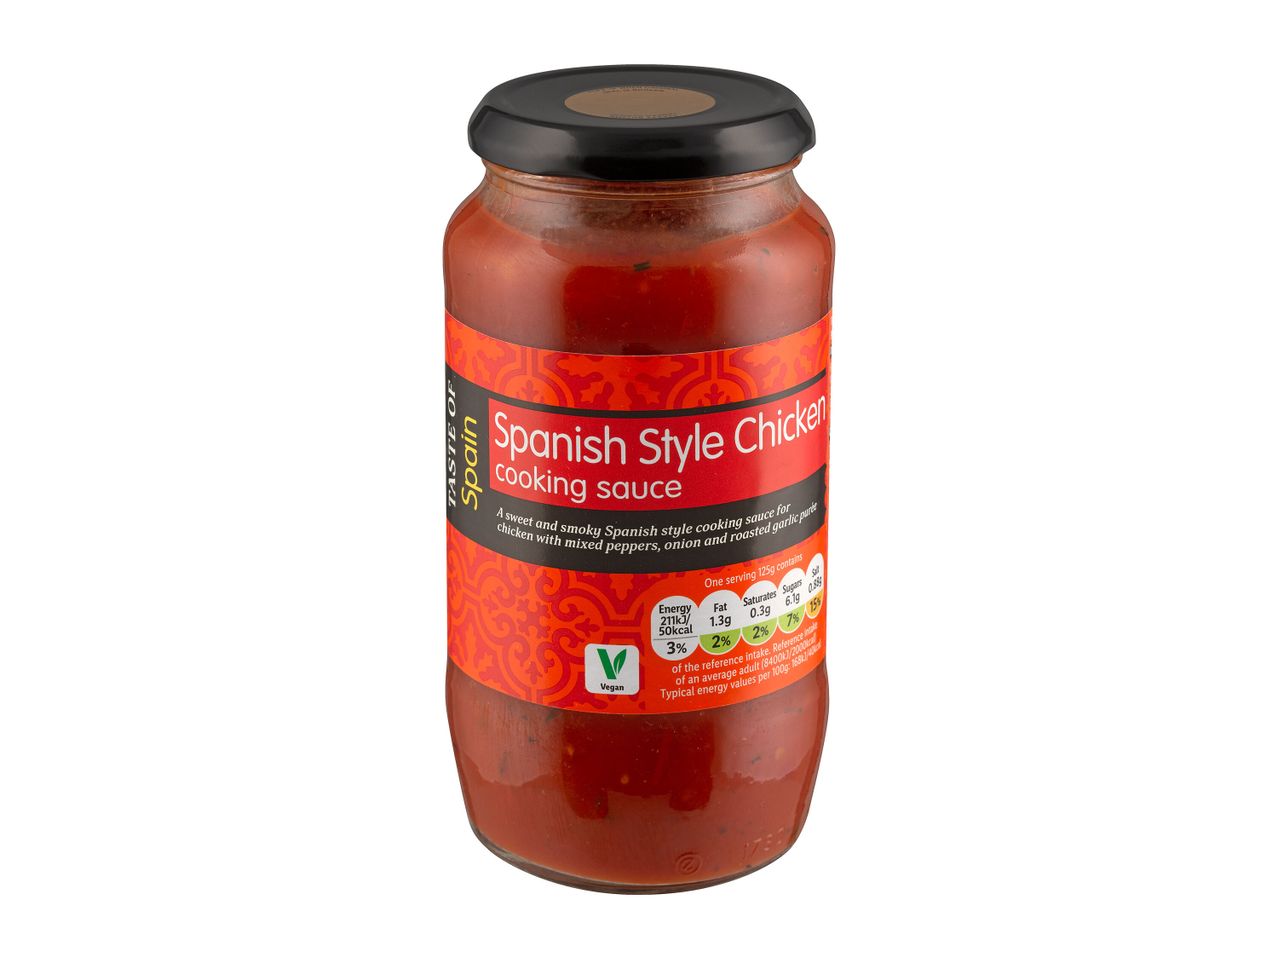 Go to full screen view: Taste of Spanish Style Chicken Cooking Sauce - Image 1